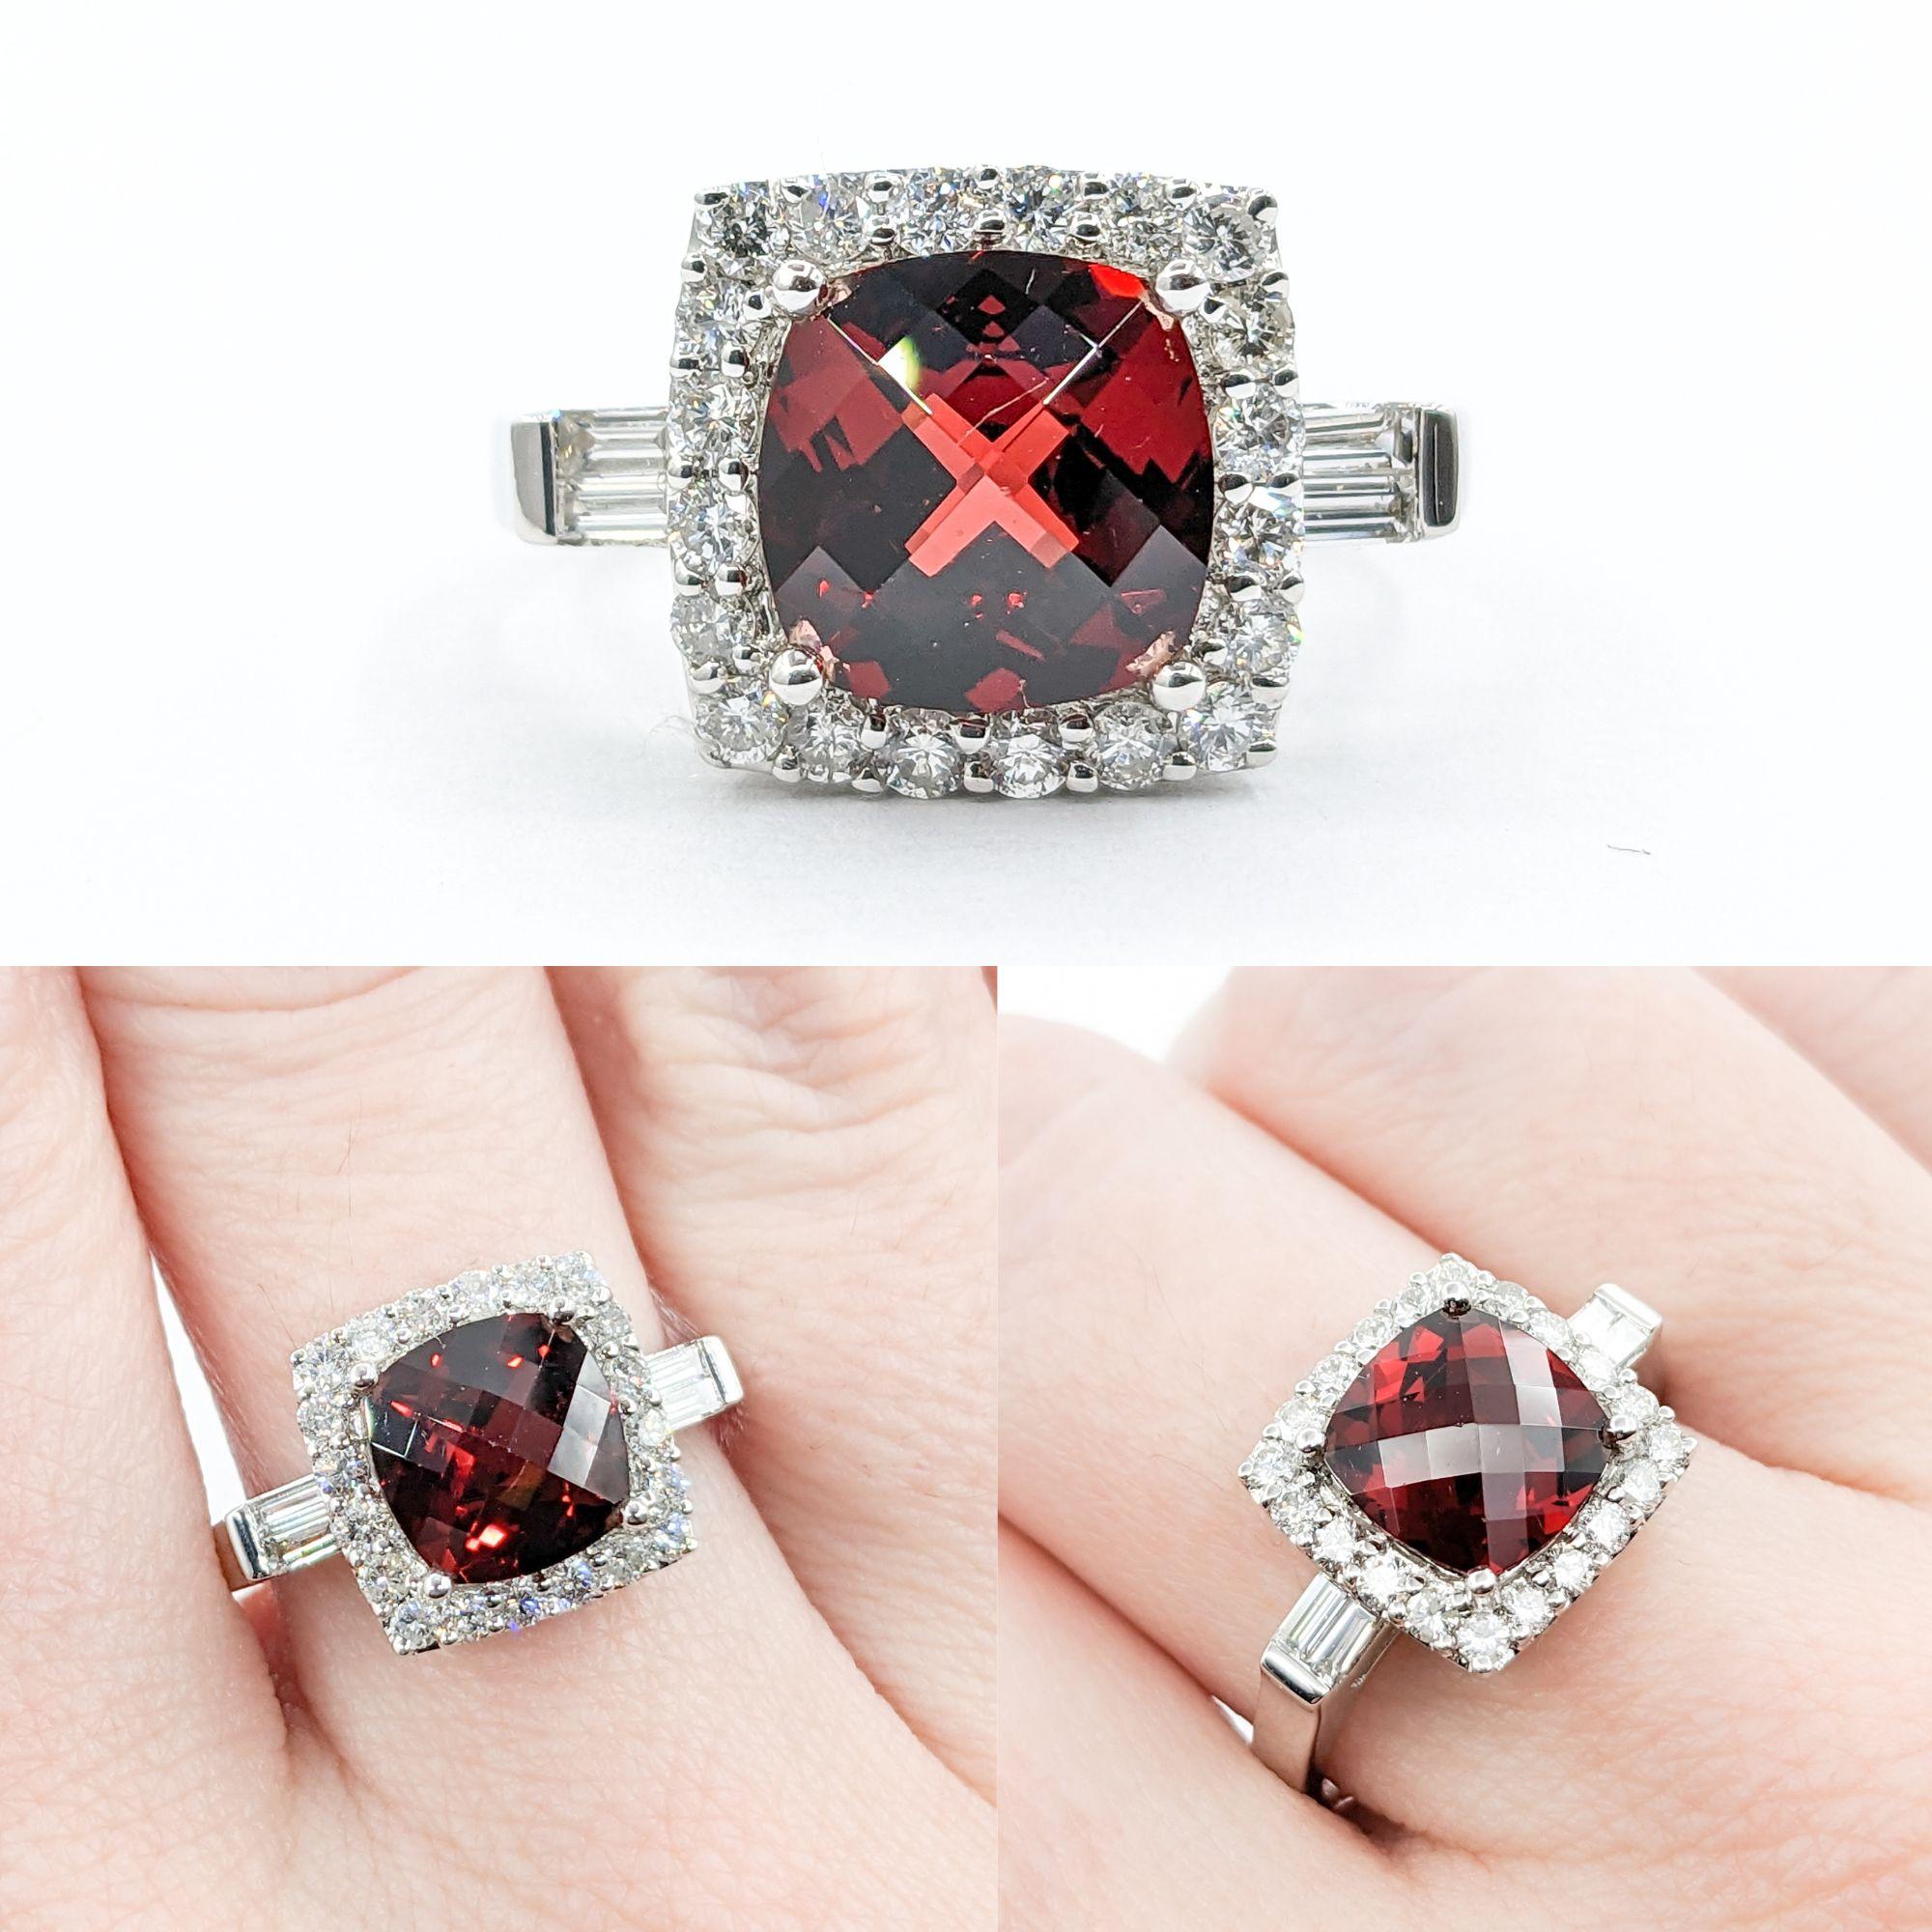 Vibrant Garnet & Diamond Cocktail Ring in 18k White Gold

Intricately crafted in 18k white gold, this Garnet ring is a celebration of color. The centerpiece of this magnificent ring is a 3.0ct cushion-cut garnet with a deep red color. In addition to